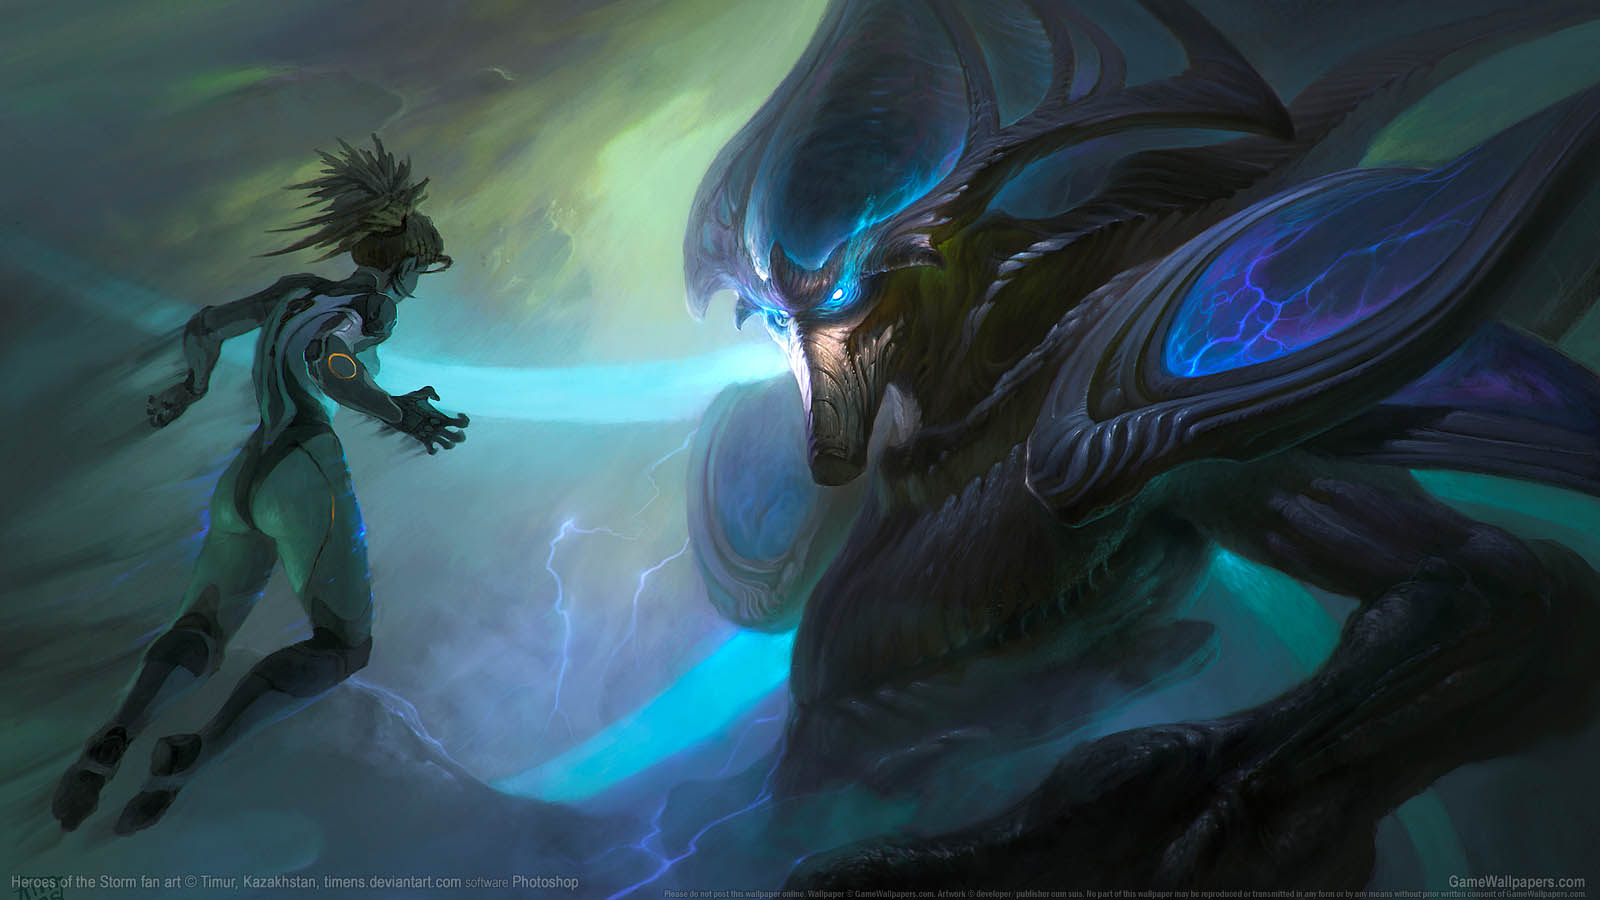 Heroes of the Storm fan art achtergrond 09 1600x900